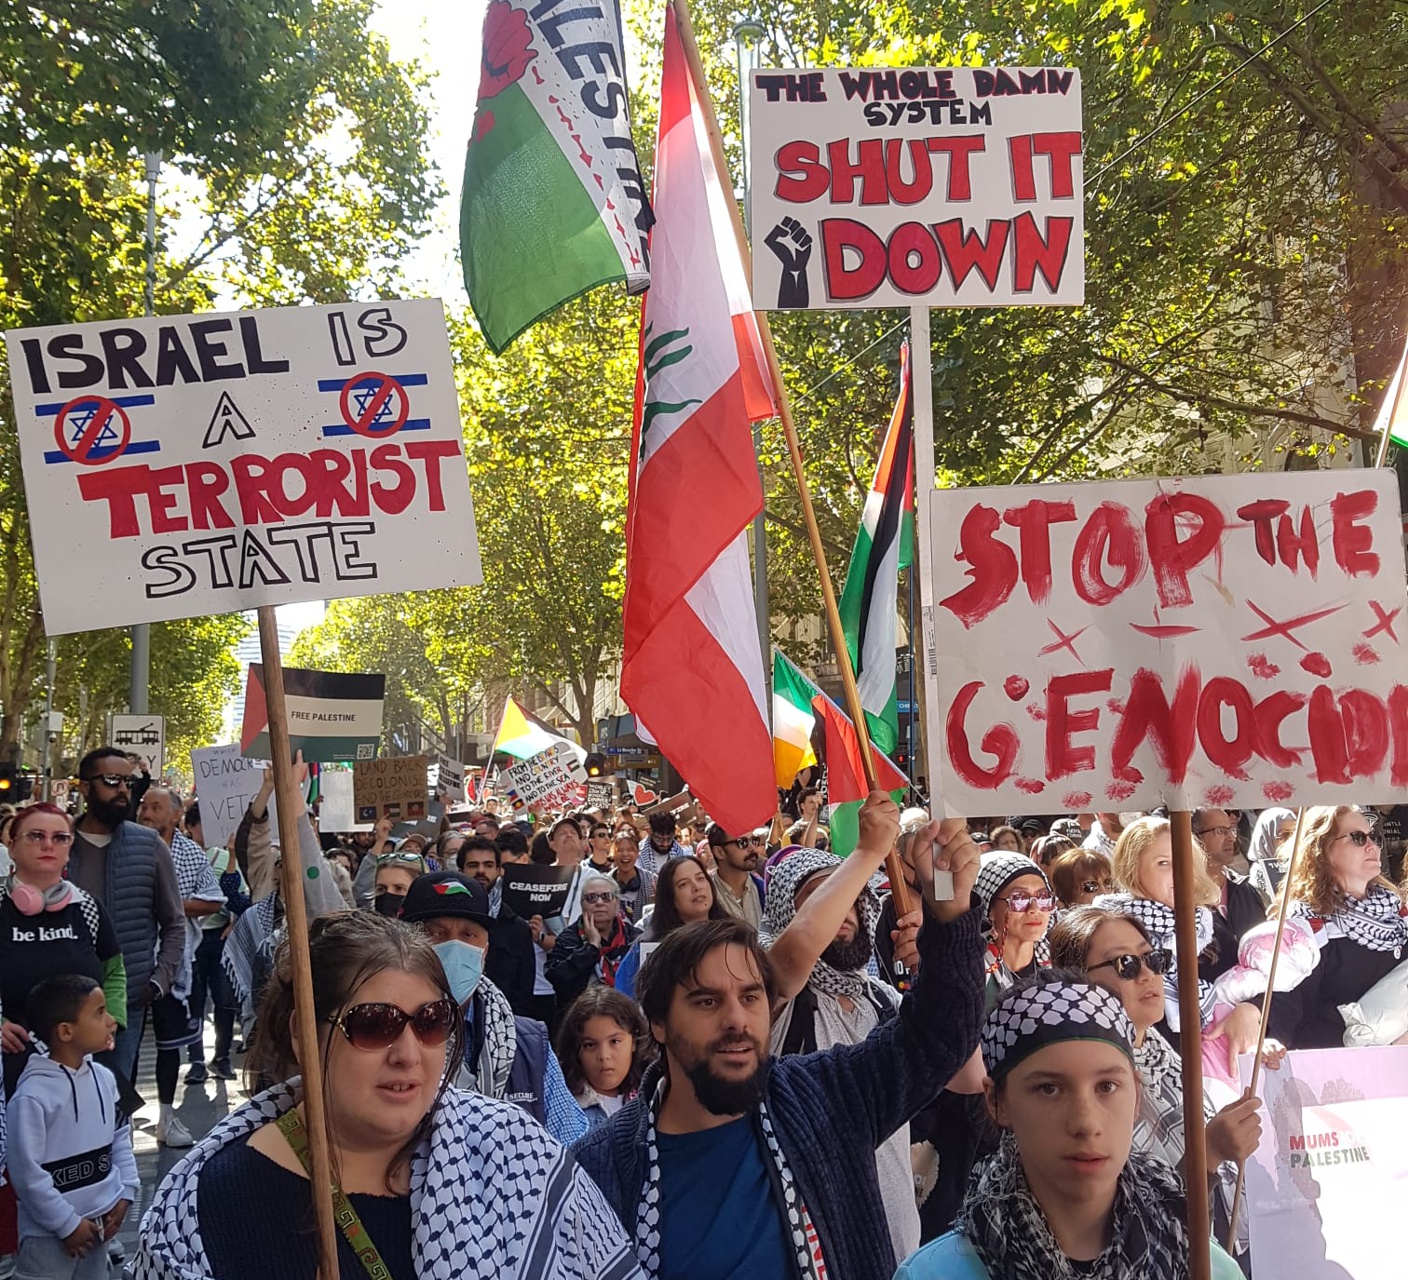 'Israel is a terror state', Naarm/Melbourne, April 21